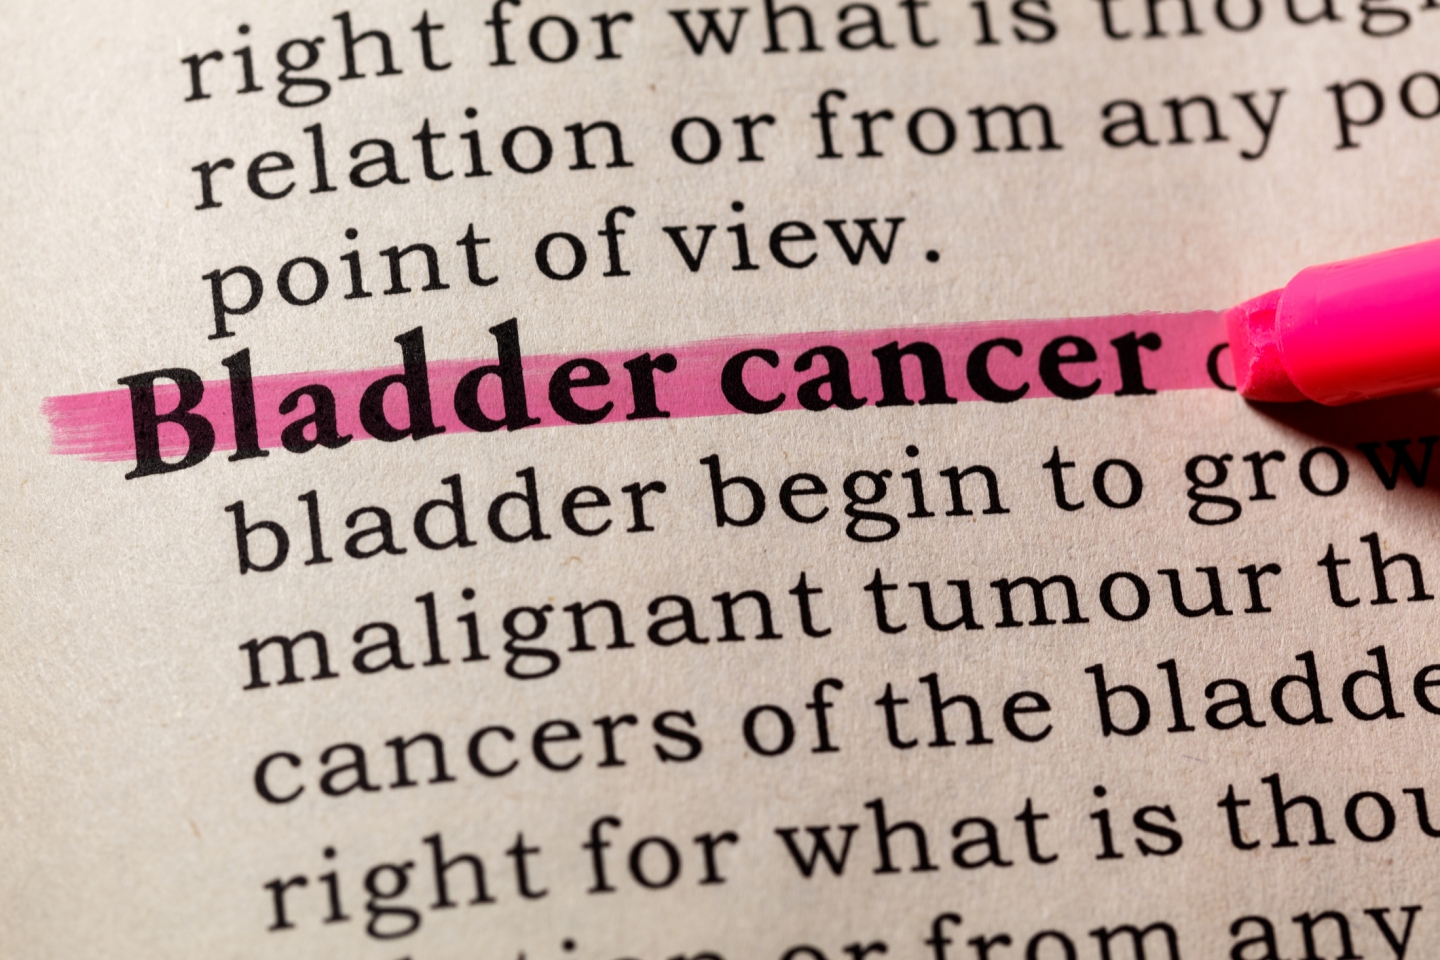 Highlighted text that reads "Bladder cancer"